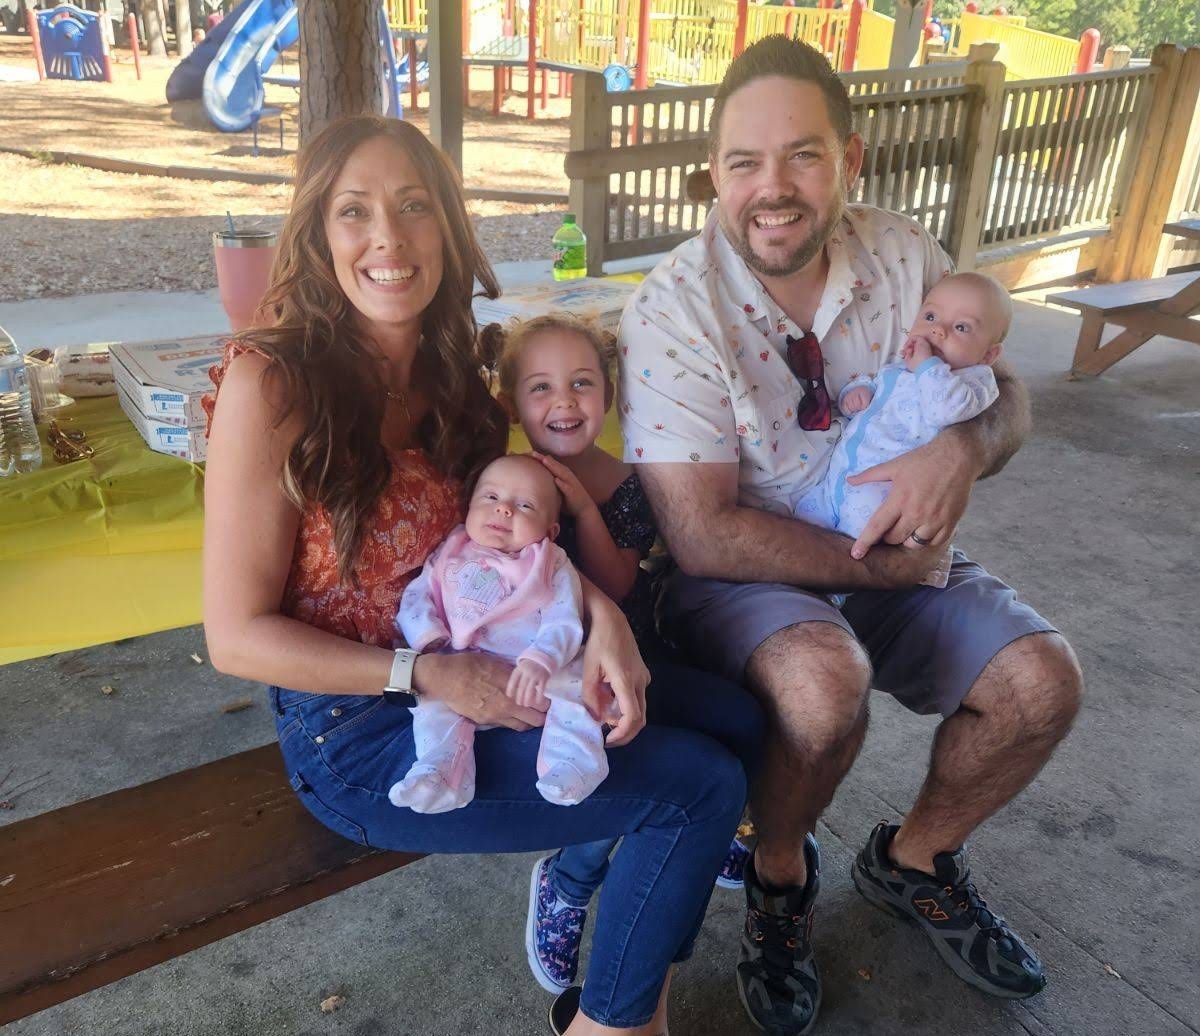 Meet Corey and Diana Sullivan and their children, Amelia, Christian, and Arabella. In a heartbreaking ordeal, Georgia's child protective services apparatus kidnapped their children under false allegations of child abuse. This is the third such story I have covered, and there